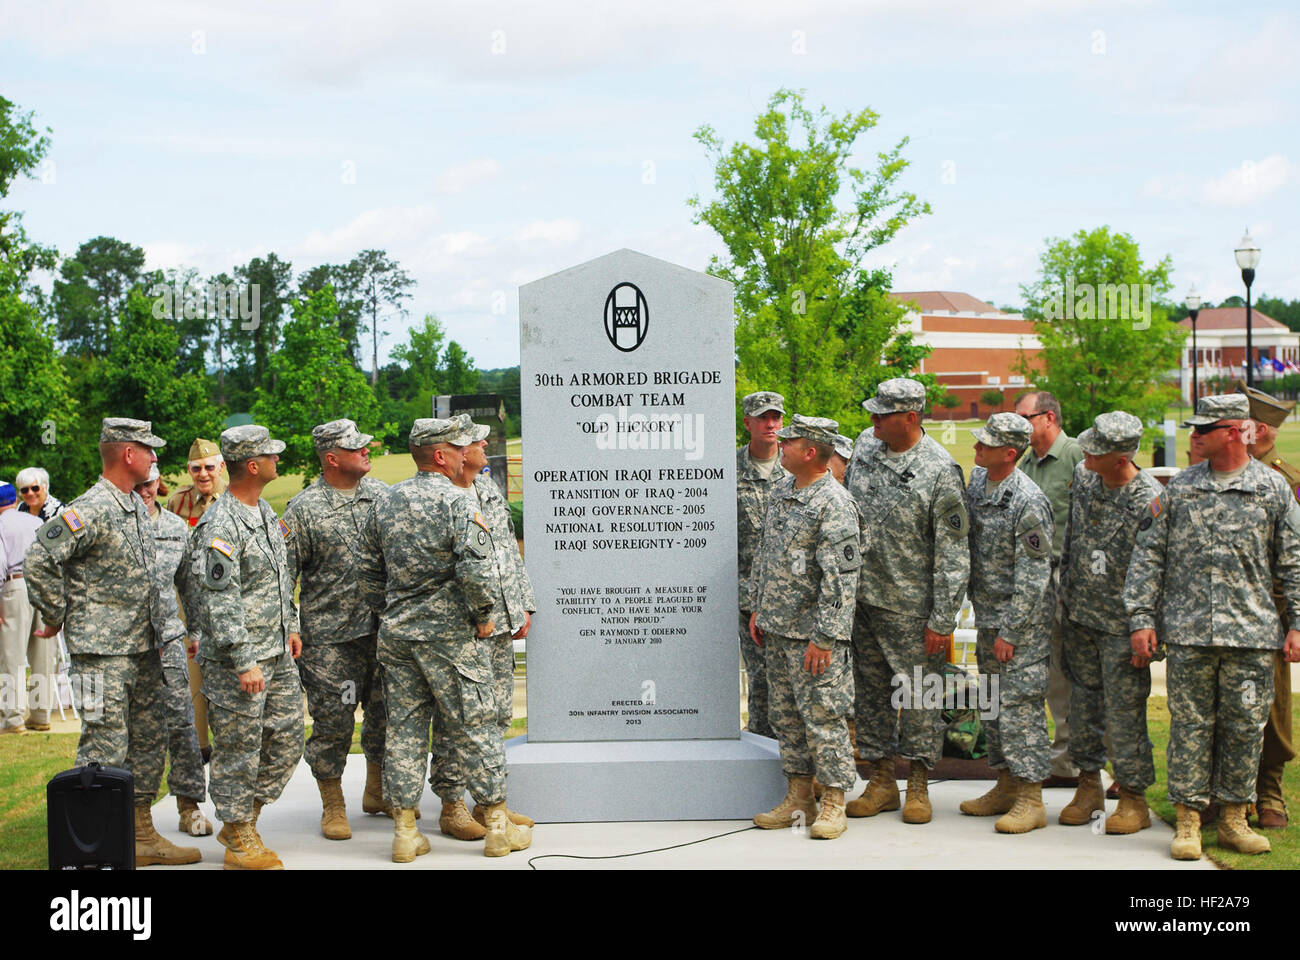 Soldiers from the 30th Armored Brigade Combat Team (successor to 30th Infantry Division) look at the monument that honors their ancestors and their own current success at the National Infantry Museum Walk of Honor at Fort Benning, June 2, 2013. Soldiers from World War II and the modern day 30th ABCT took part in the ceremony that honored the unit for their service from past to present. The 30th ID was known as the 'Workhorse of the Western Front,' and was most noted for breaching the famed Siegfried Line, which led to the capture of the first German city of Aachen in 1944. The 30th ABCT deploy Stock Photo